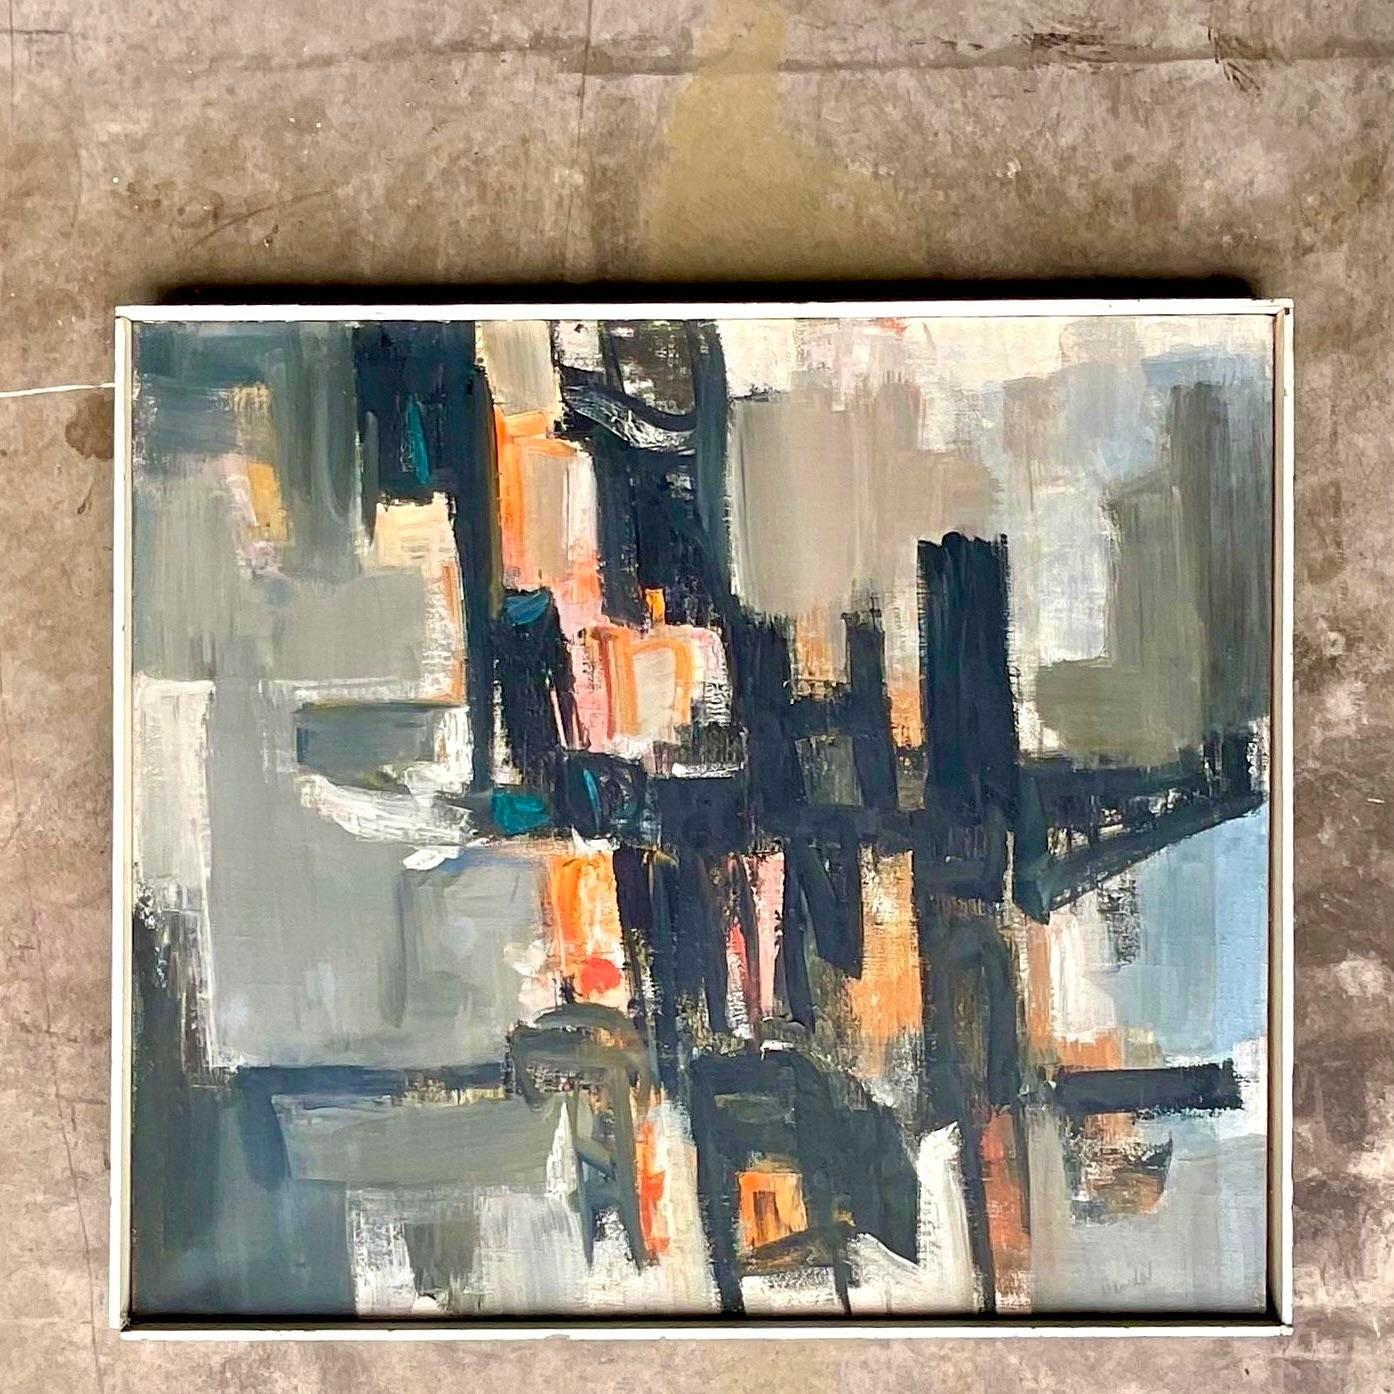 A fabulous vintage Boho original oil painting on canvas. A chic Abstract composition in dark bold colors. Signed by the artist. Acquired from a Palm Beach estate.